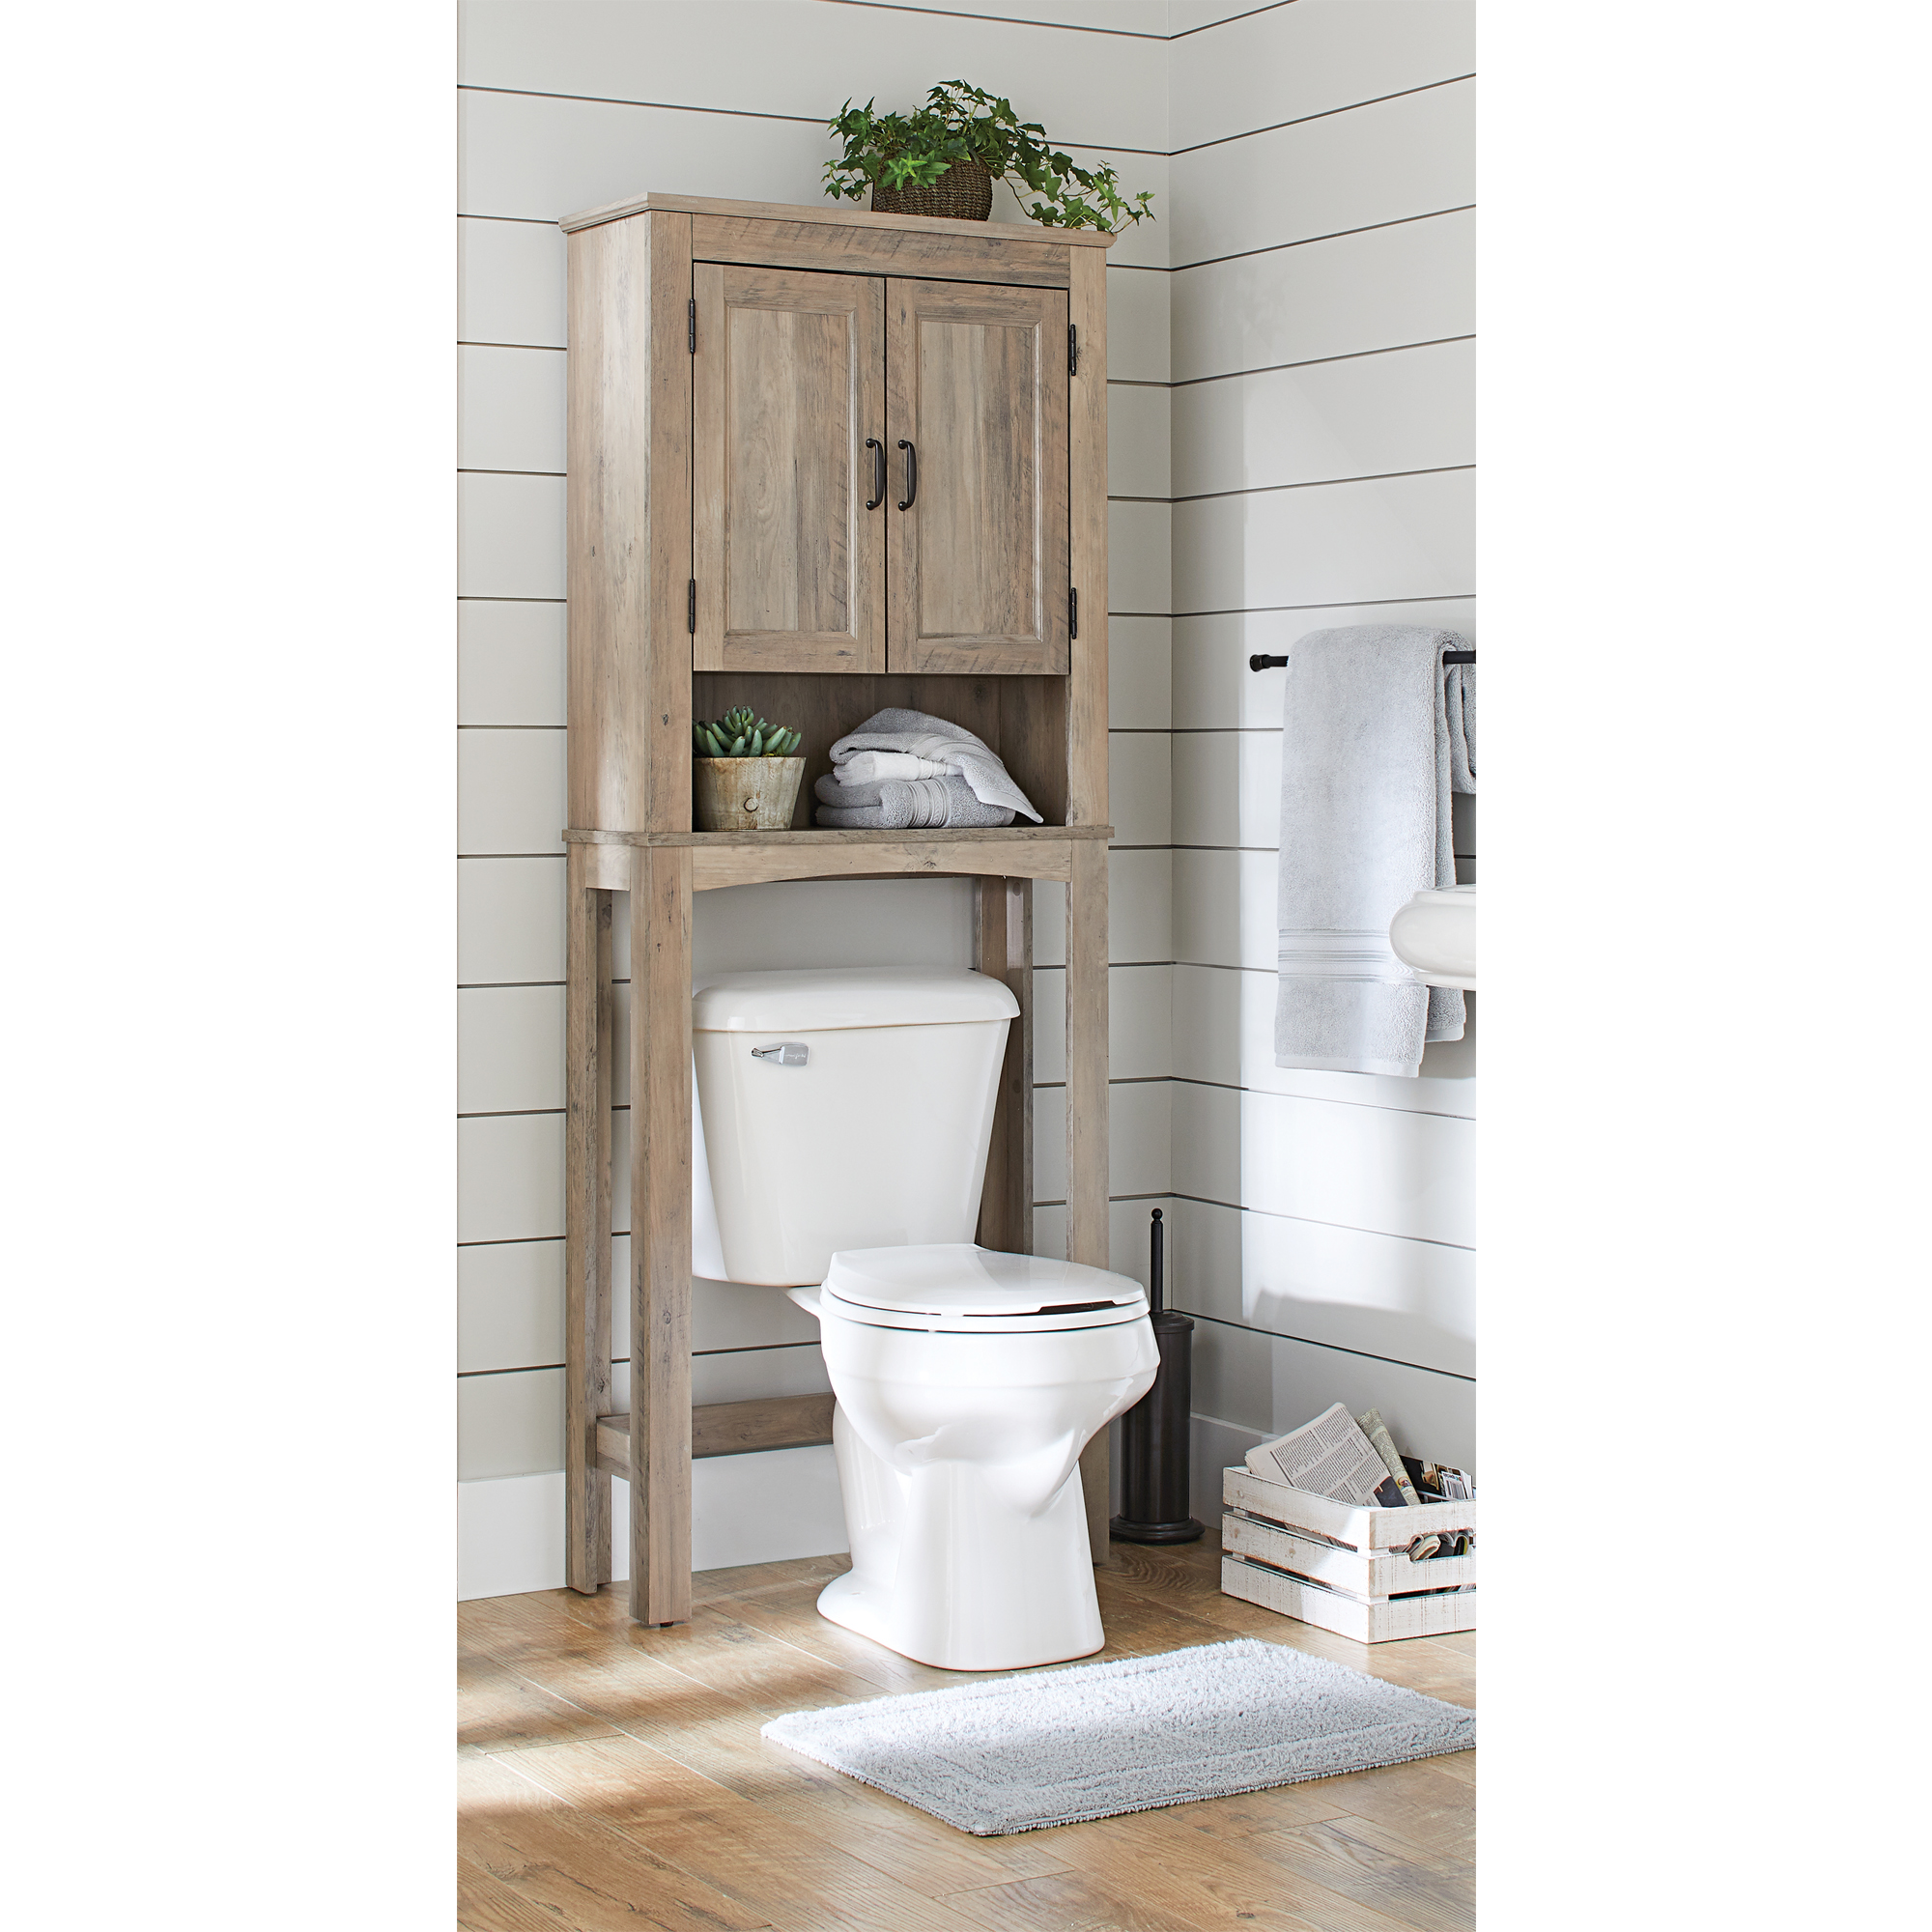 Better Homes & Gardens Northampton Over the Toilet Bathroom Space Saver, Rustic Gray Finish